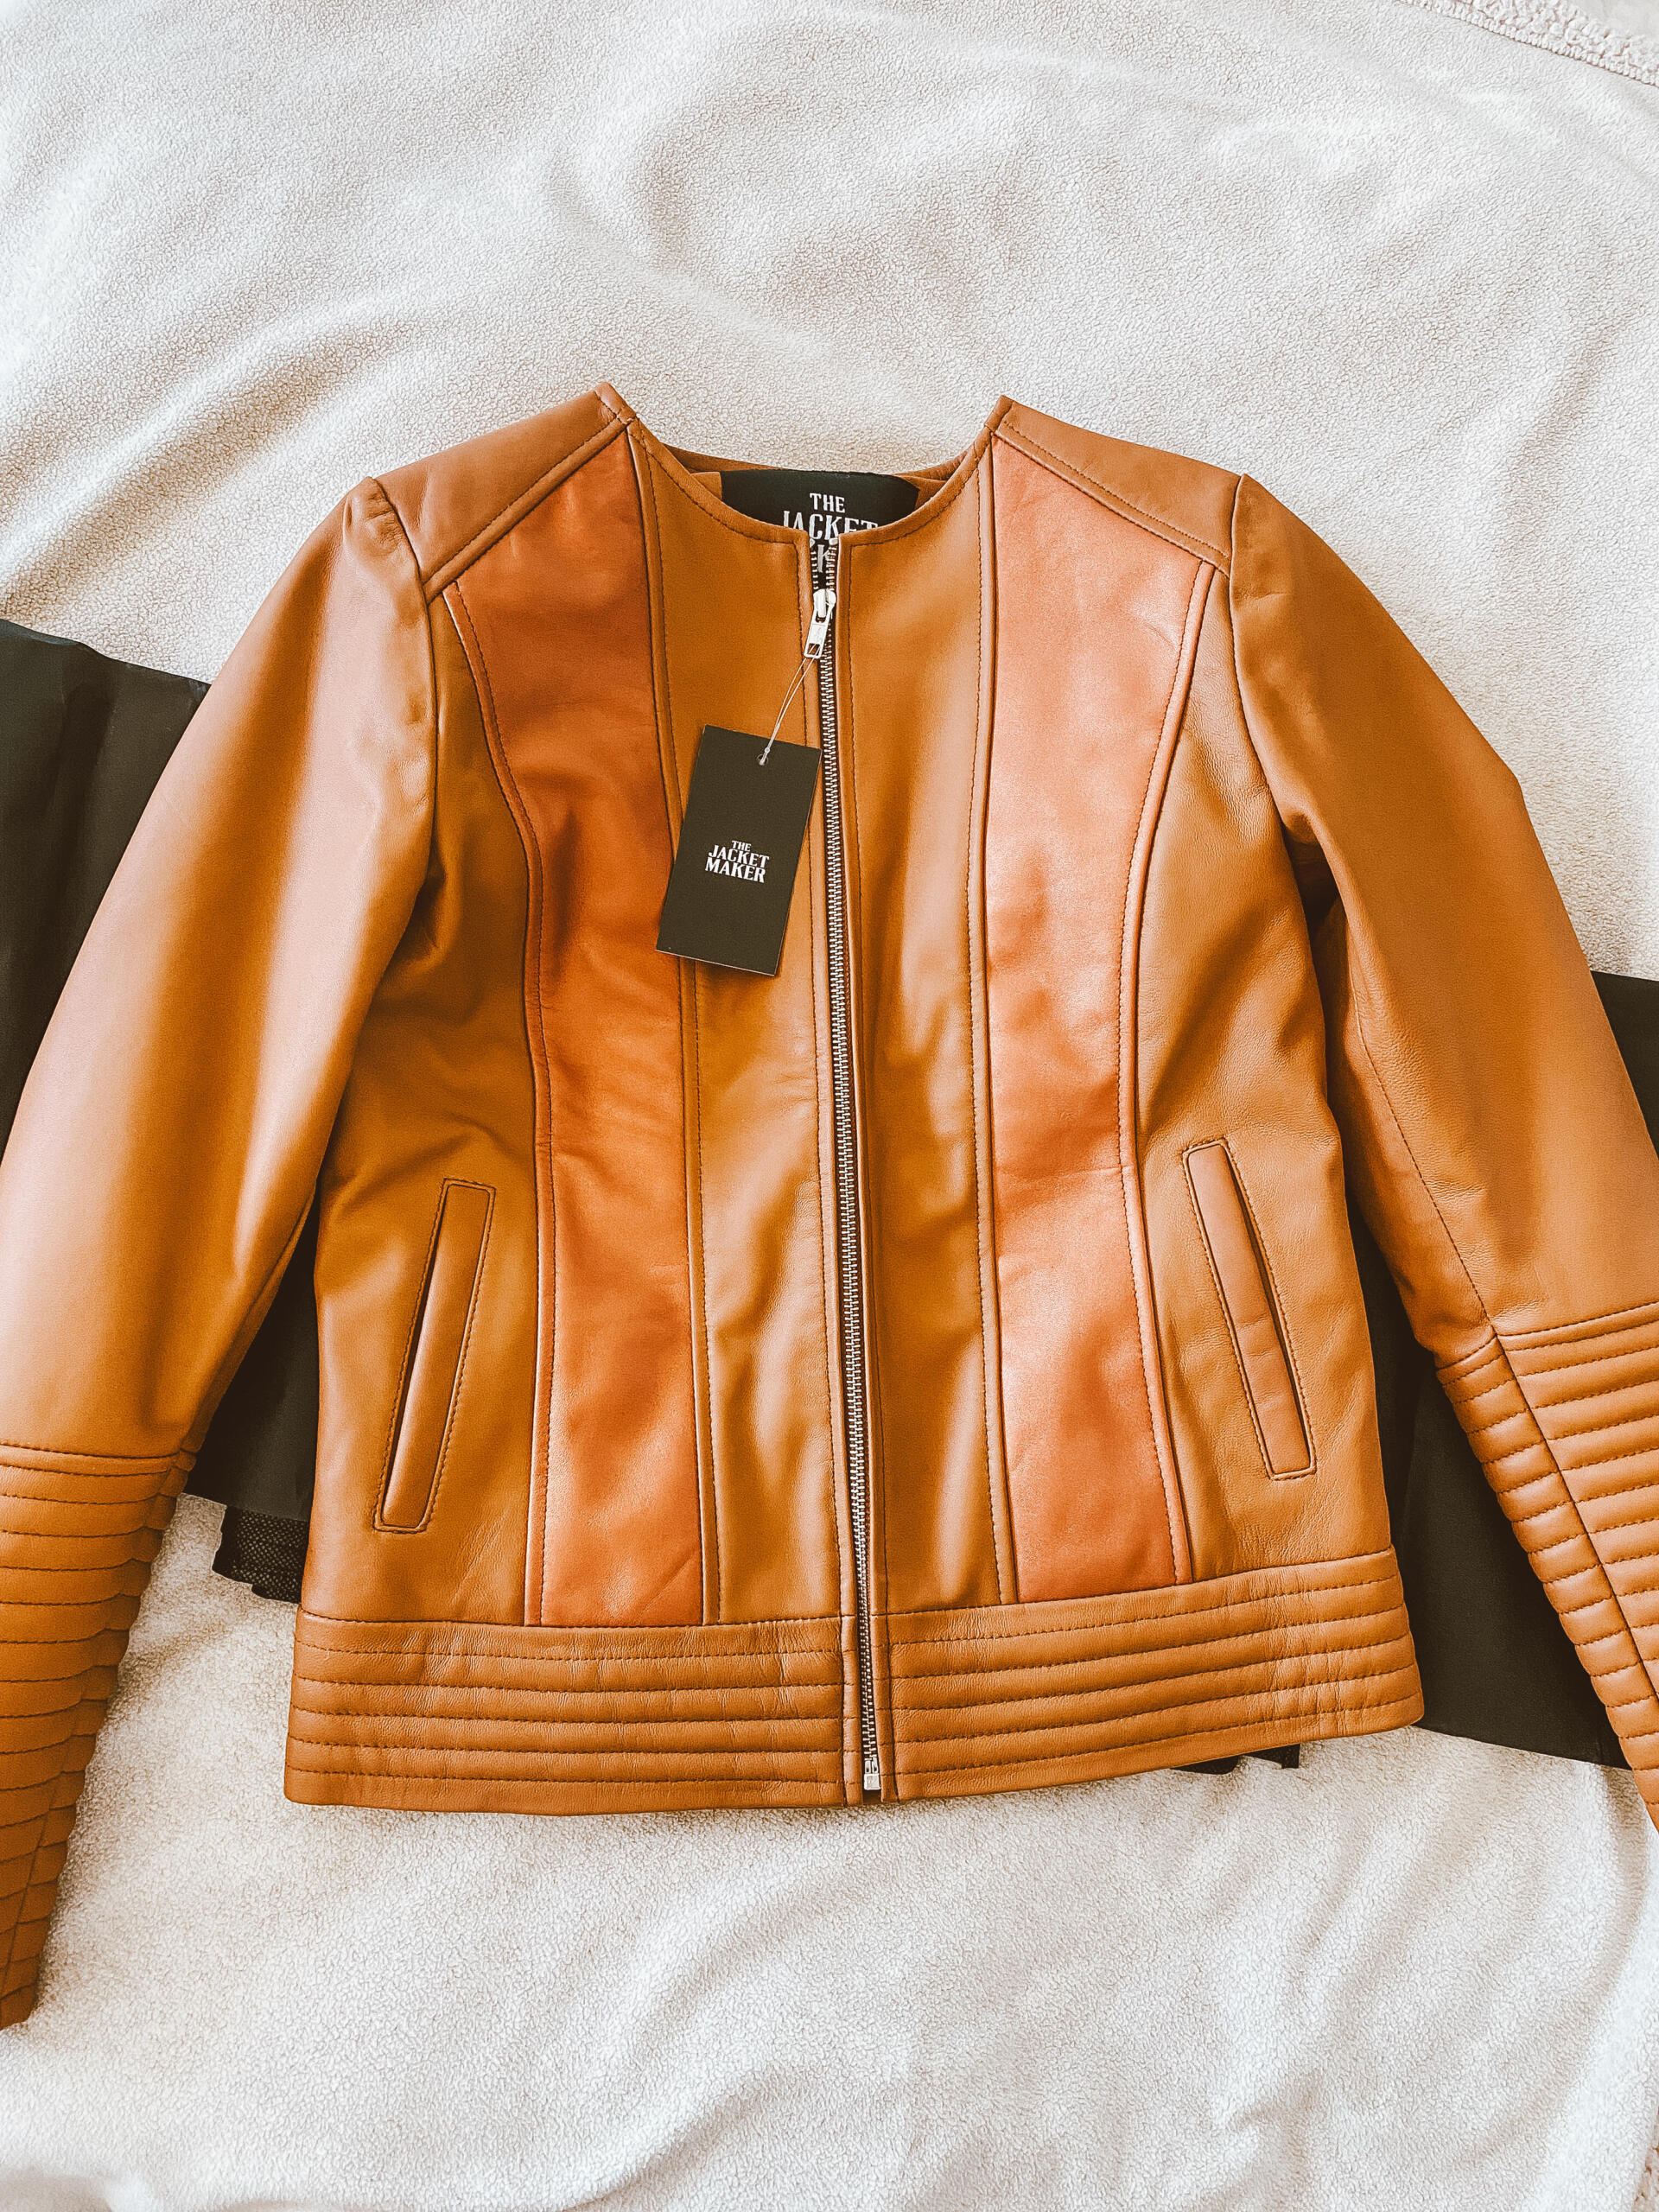 The Jacket Maker: How To Style A Leather Jacket